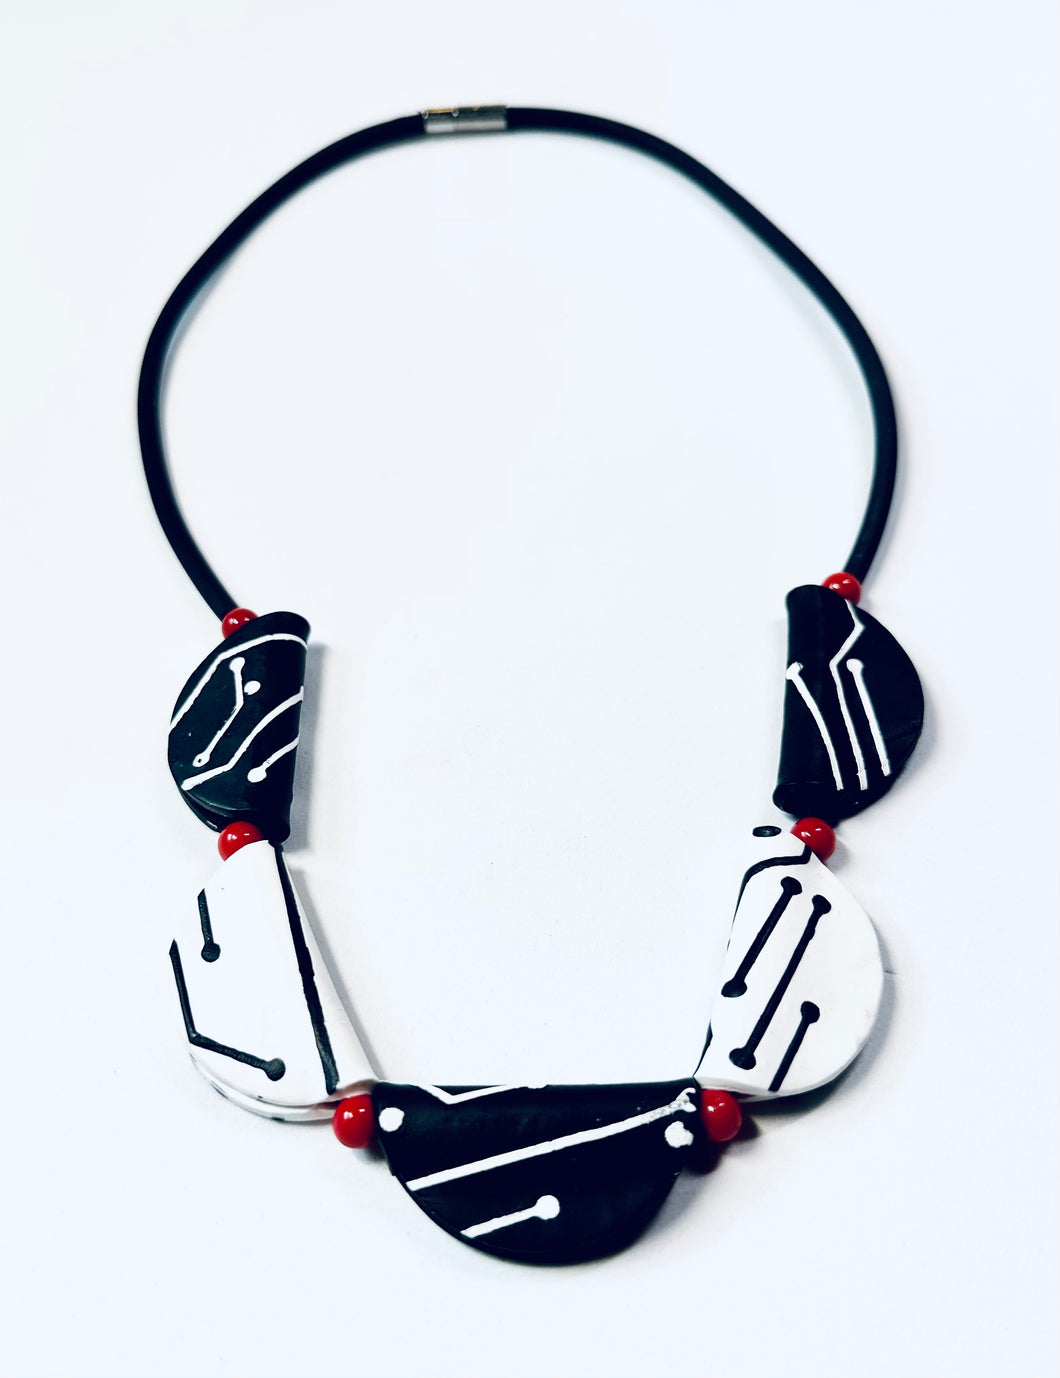 Polymer Necklace Black, White, Red